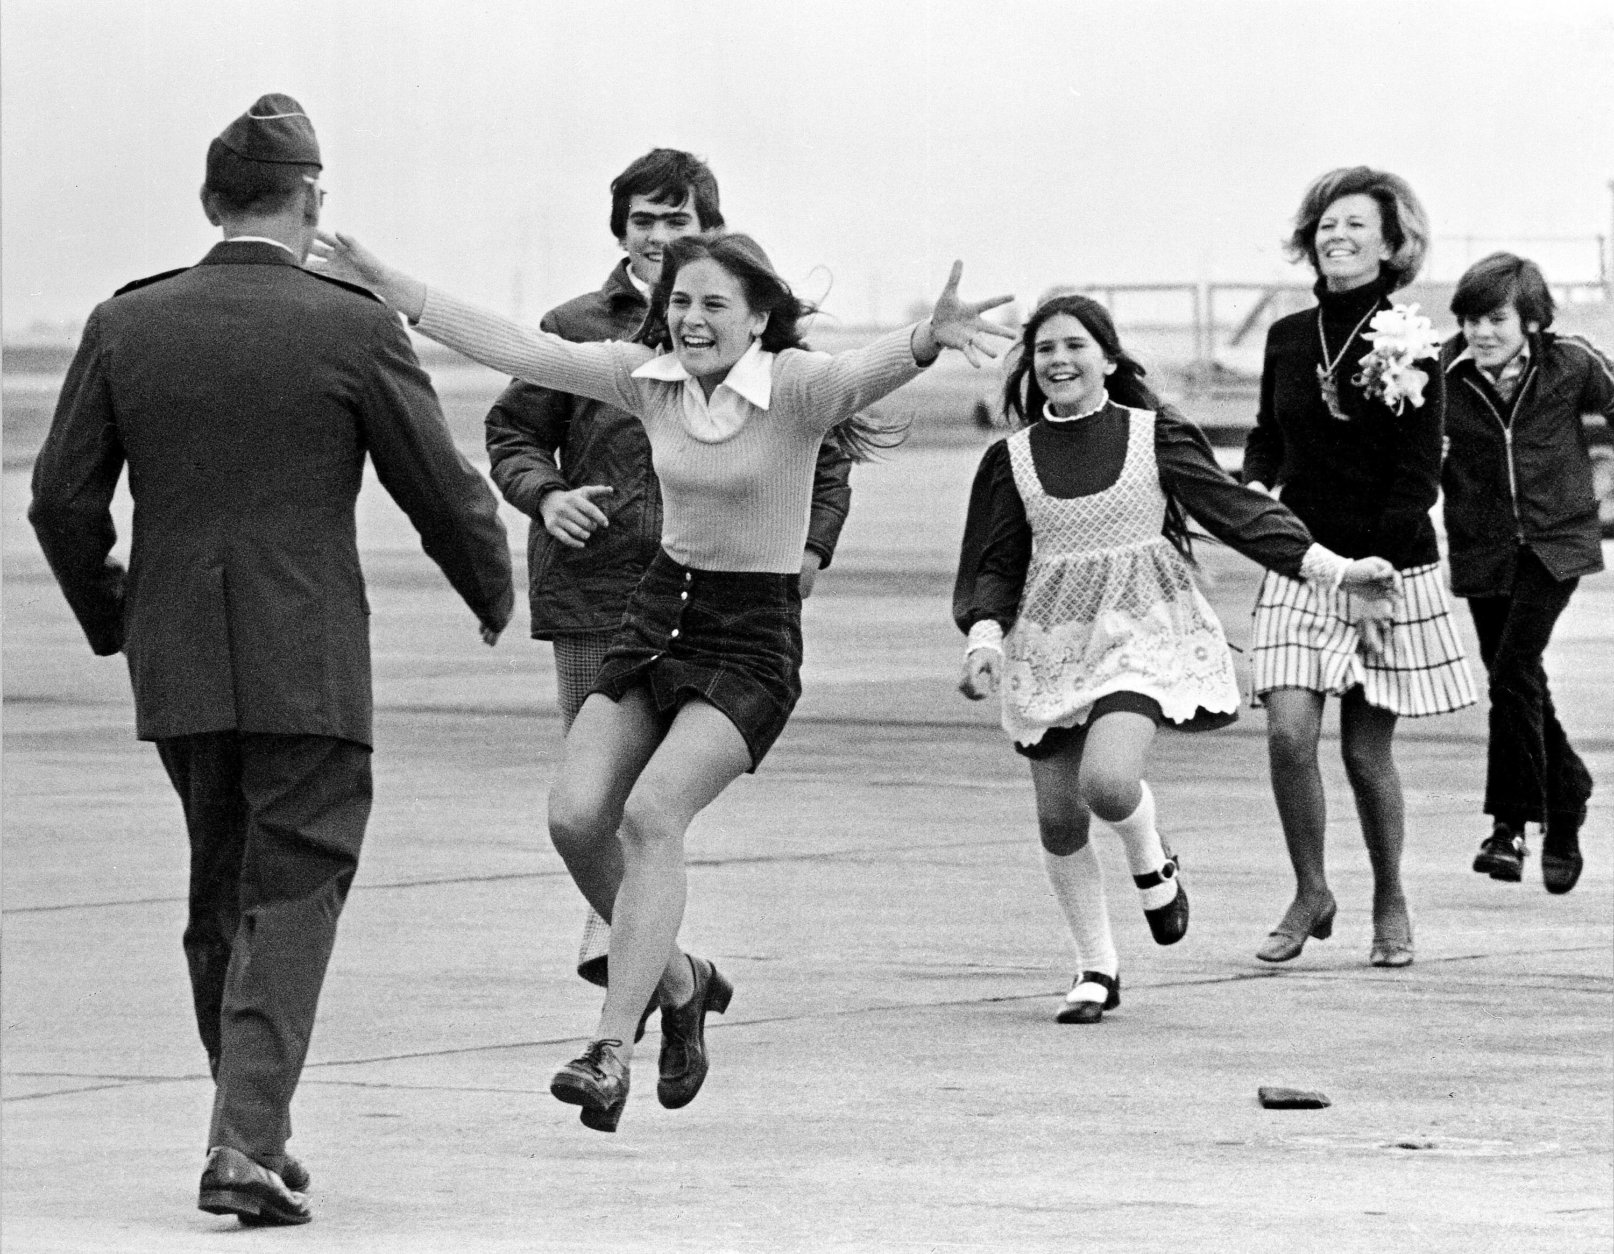 Released prisoner of war Lt. Col. Robert L. Stirm is greeted by his family at Travis Air Force Base in Fairfield, Calif., as he returns home from the Vietnam War, March 17, 1973.  In the lead is Stirm's daughter Lori, 15; followed by son Robert, 14; daughter Cynthia, 11; wife Loretta and son Roger, 12.  (AP Photo/Sal Veder)